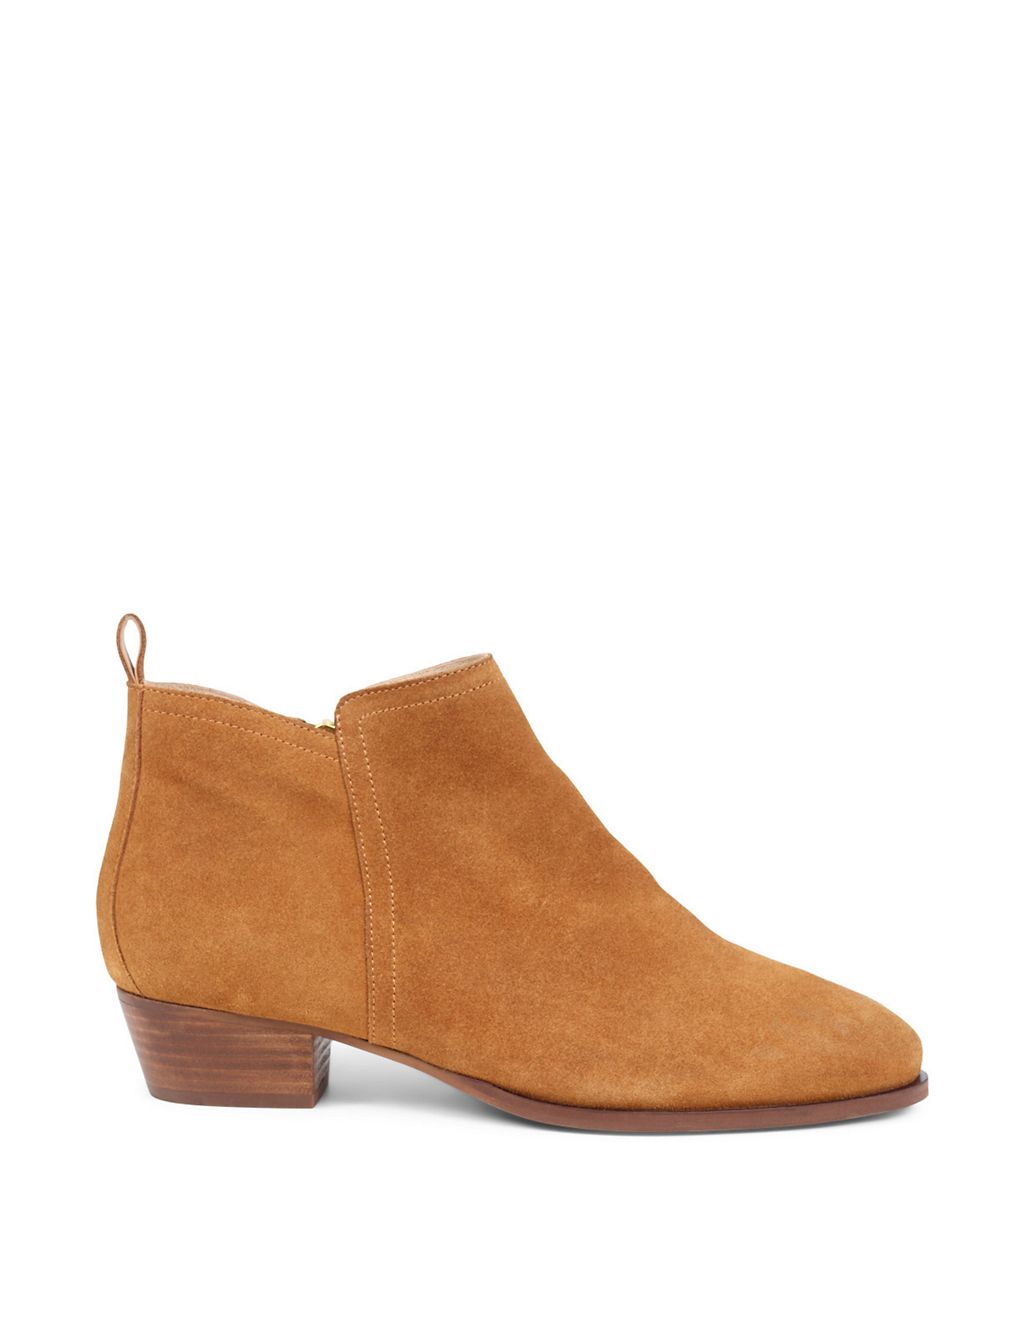 Suede Block Heel Round Toe Ankle Boots 1 of 7